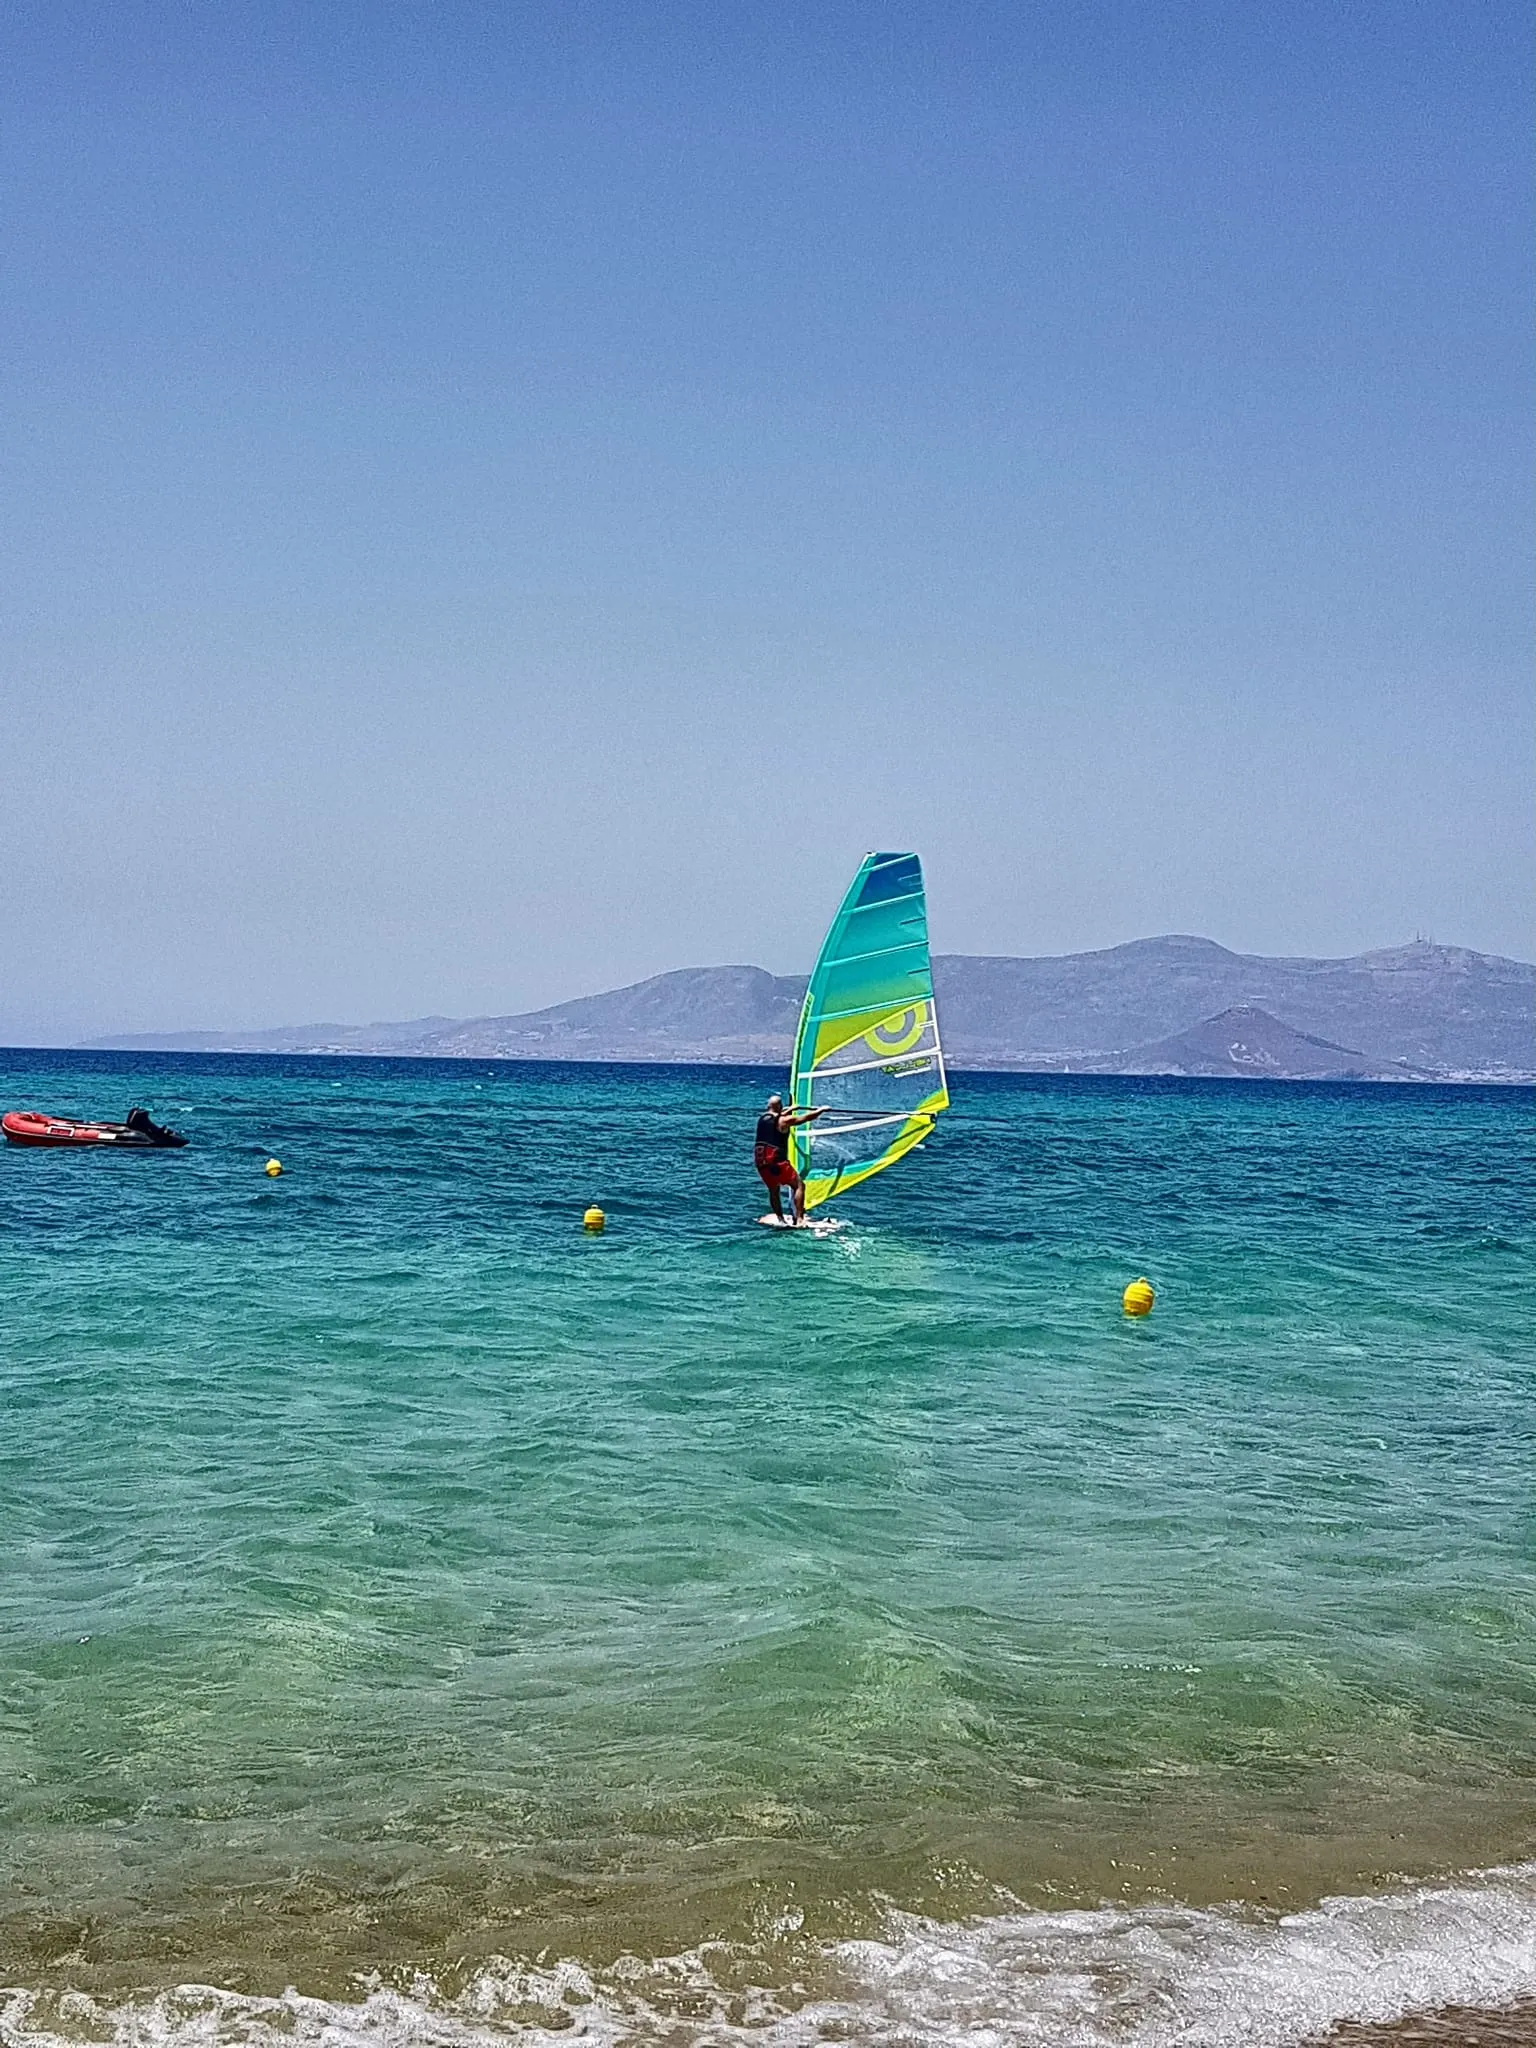 Things To Do In Naxos - 10 Amazing Places You Need To Explore - Surfing in Plaka beach